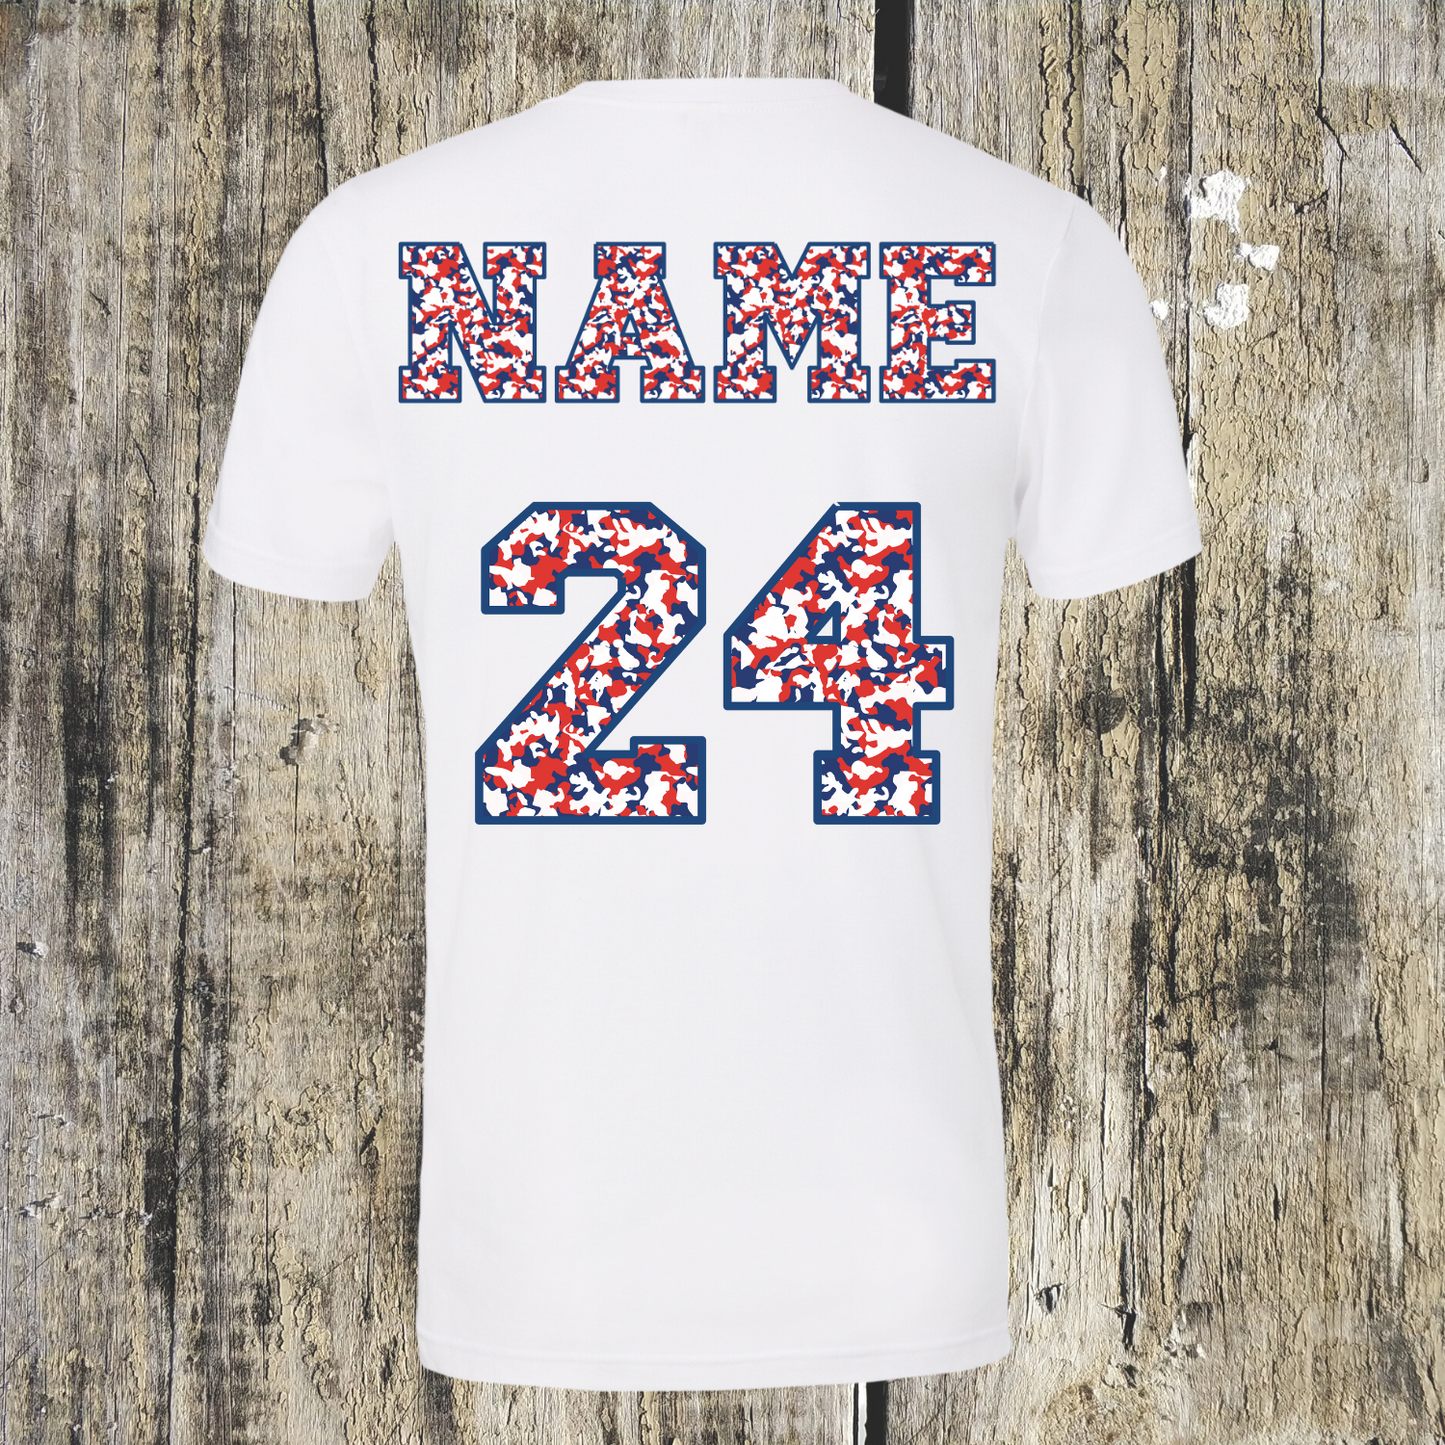 Pace Red + White + Blue Camo Tee